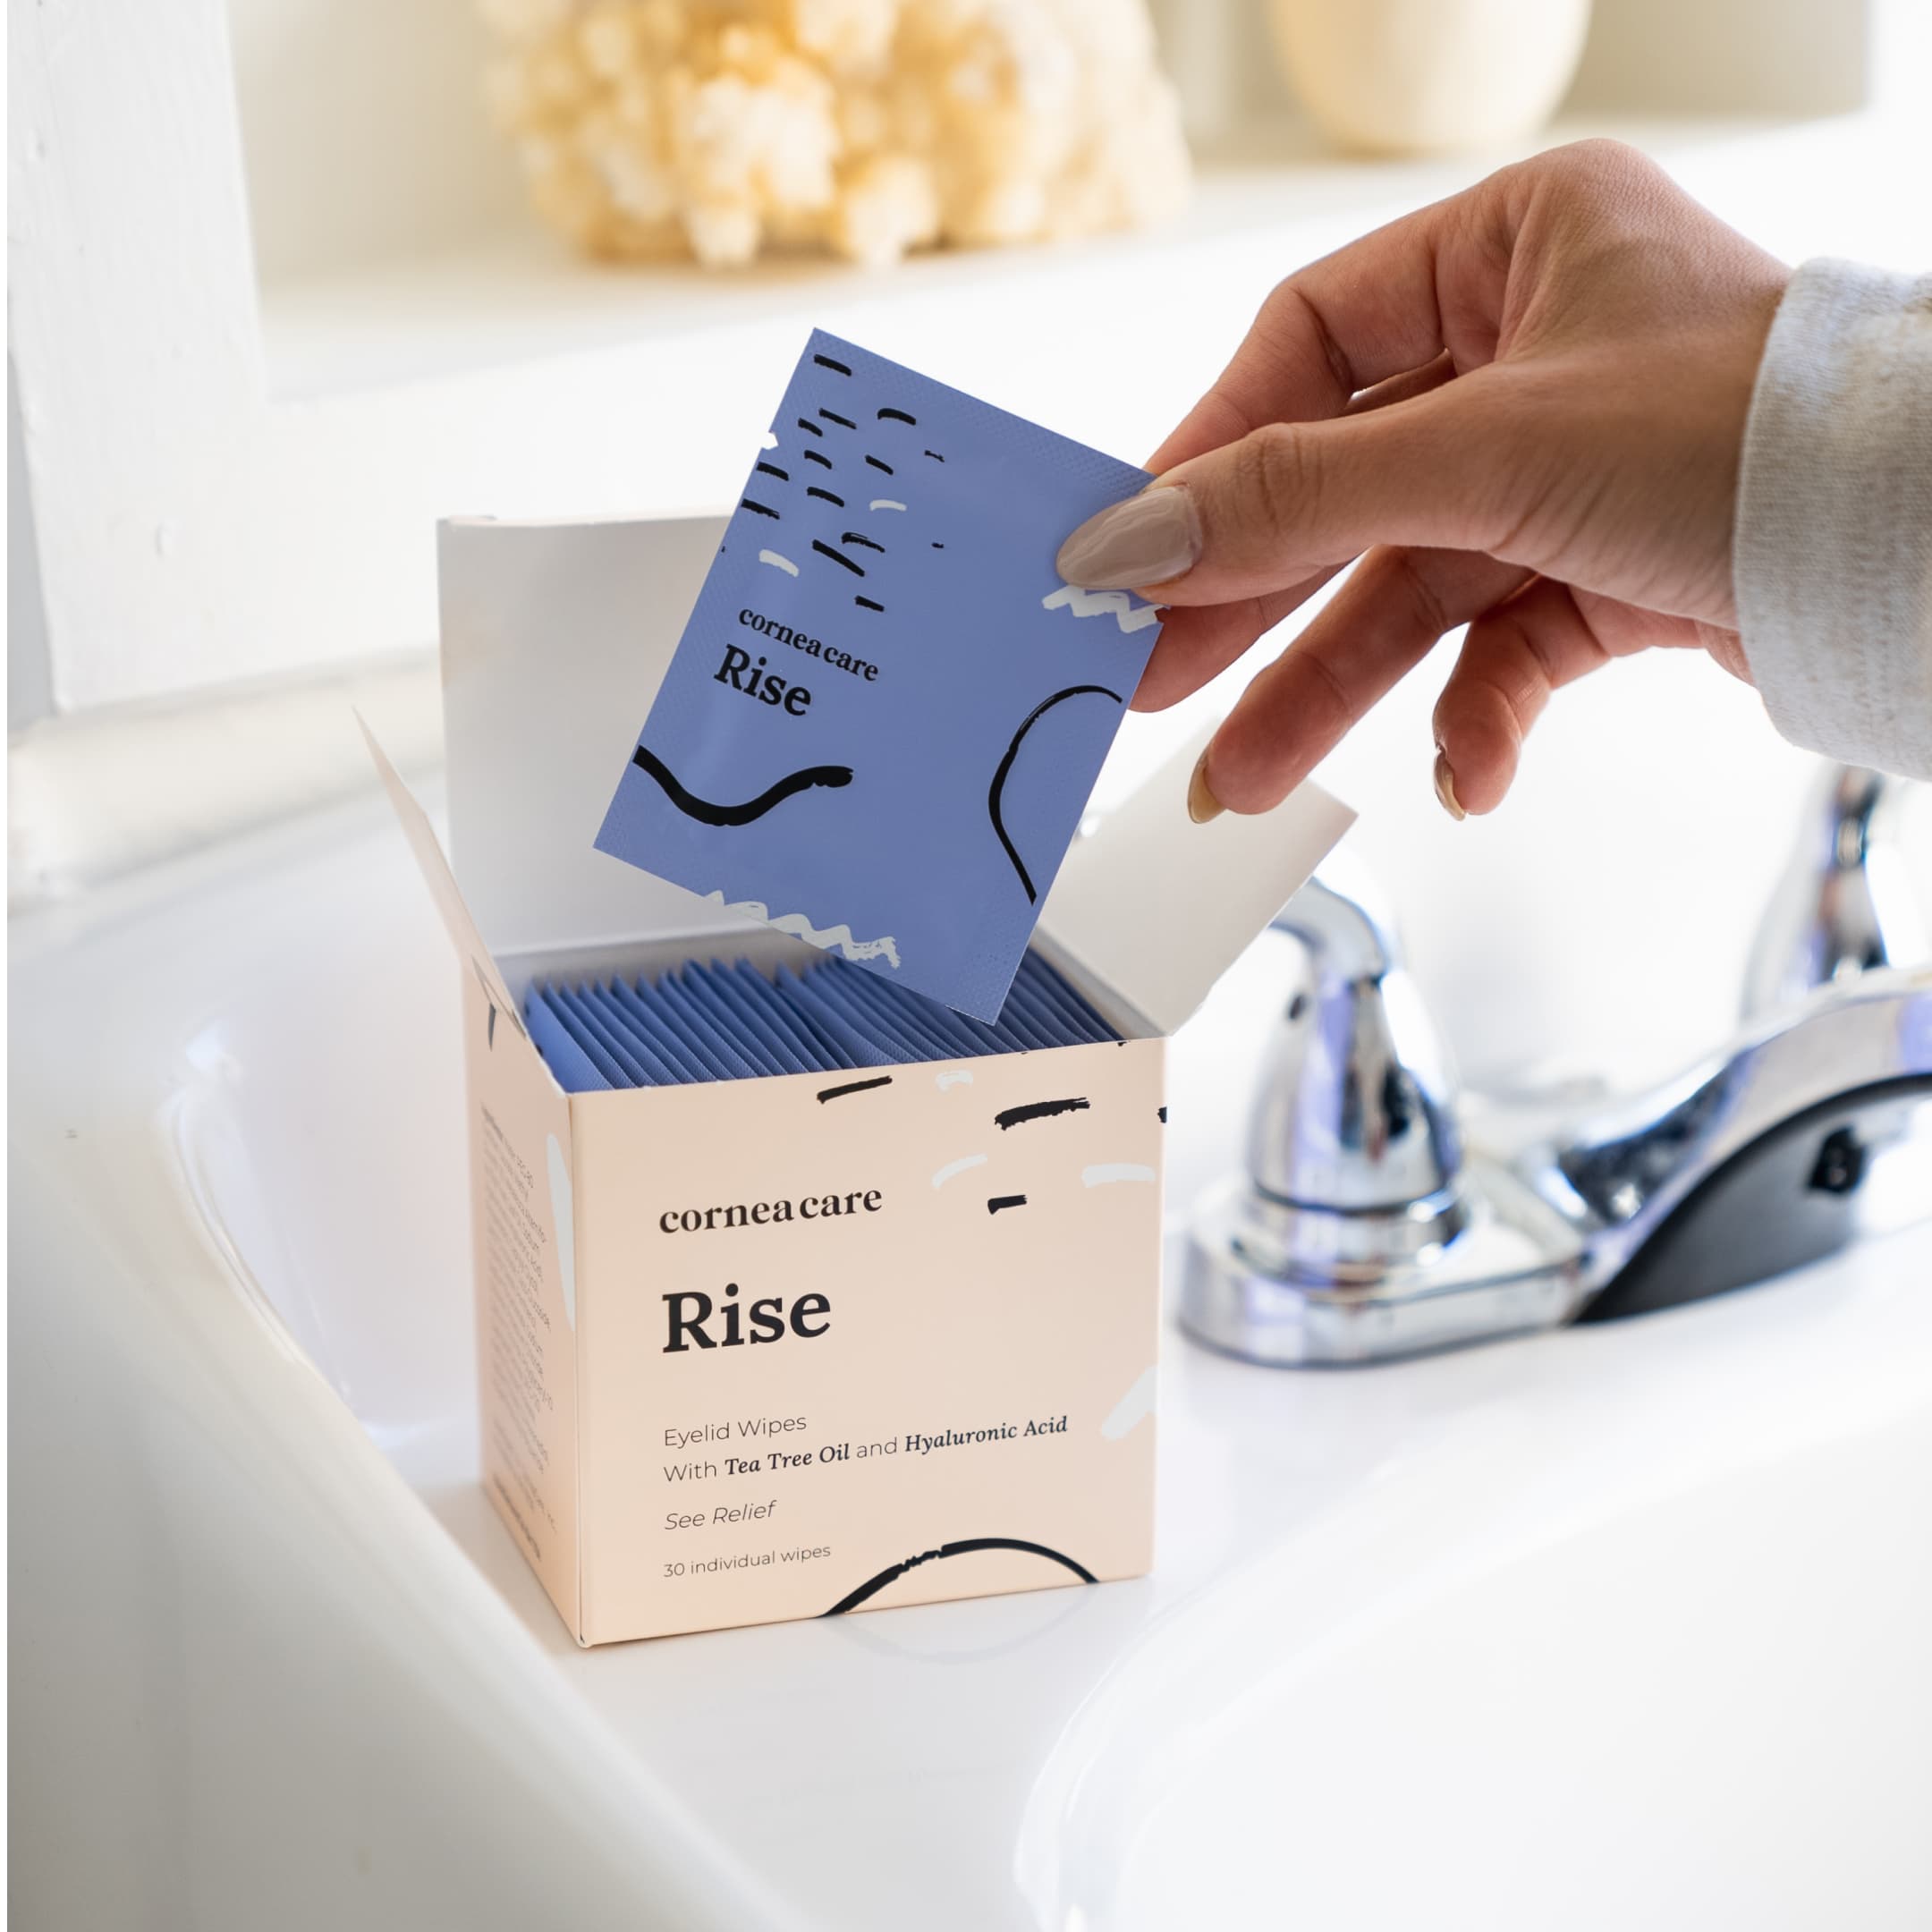 CorneaCare Rise Eyelid Wipe Box and Packets